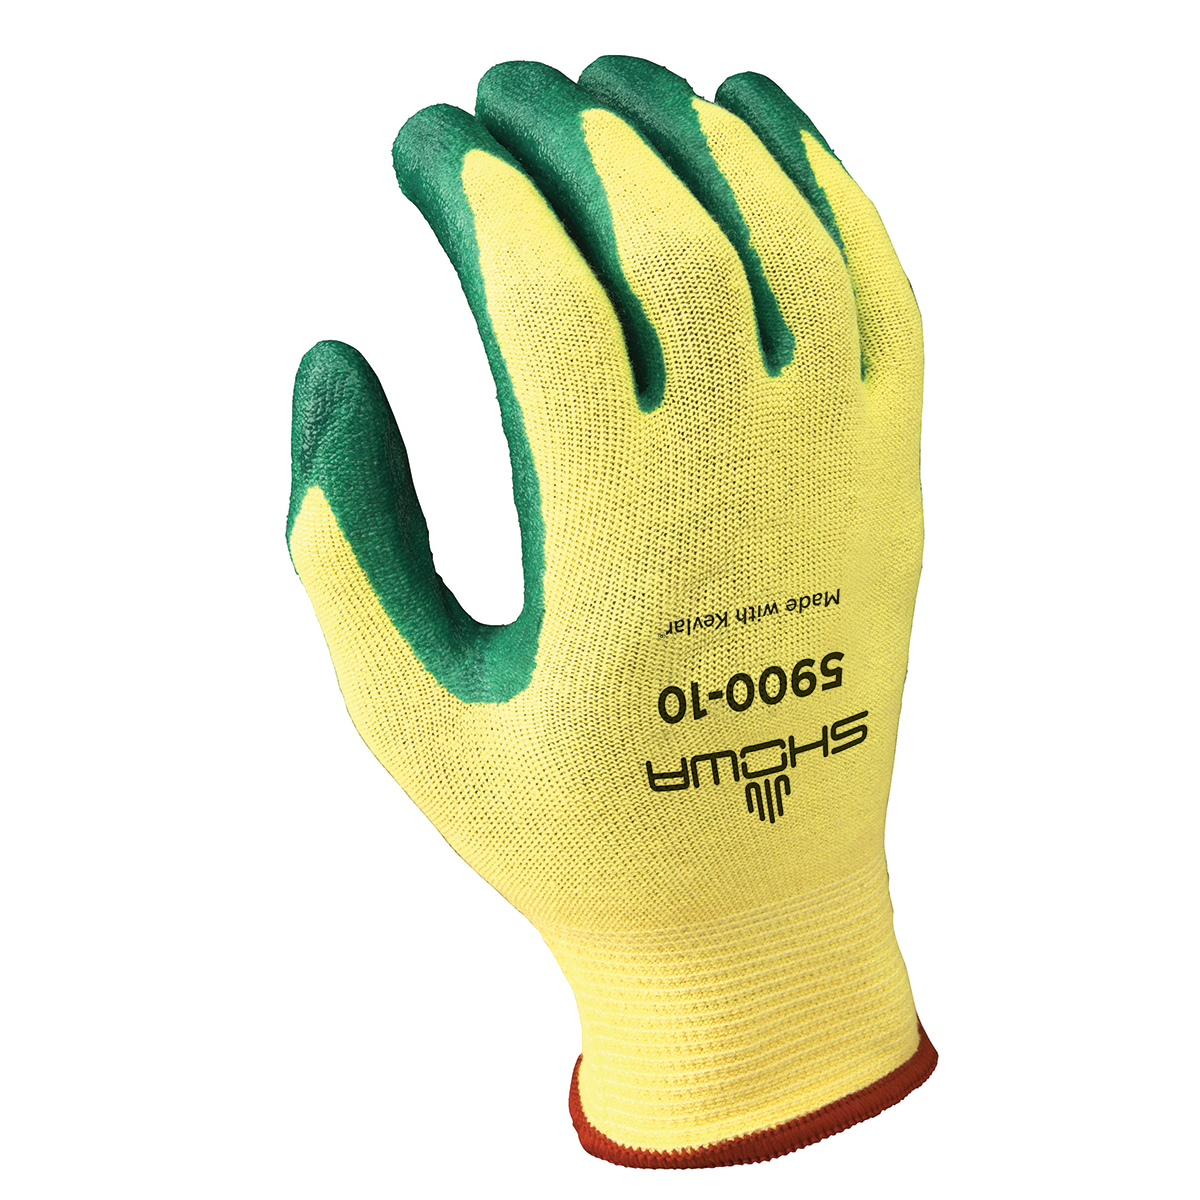 Cut resistant, nitrile-coated flat-dipped, yellow/green dip, seamless, cut-resistant, Kevlar®-Lycra® shell, extra large ANSI CUT LEVEL A3 - Cut Resistant